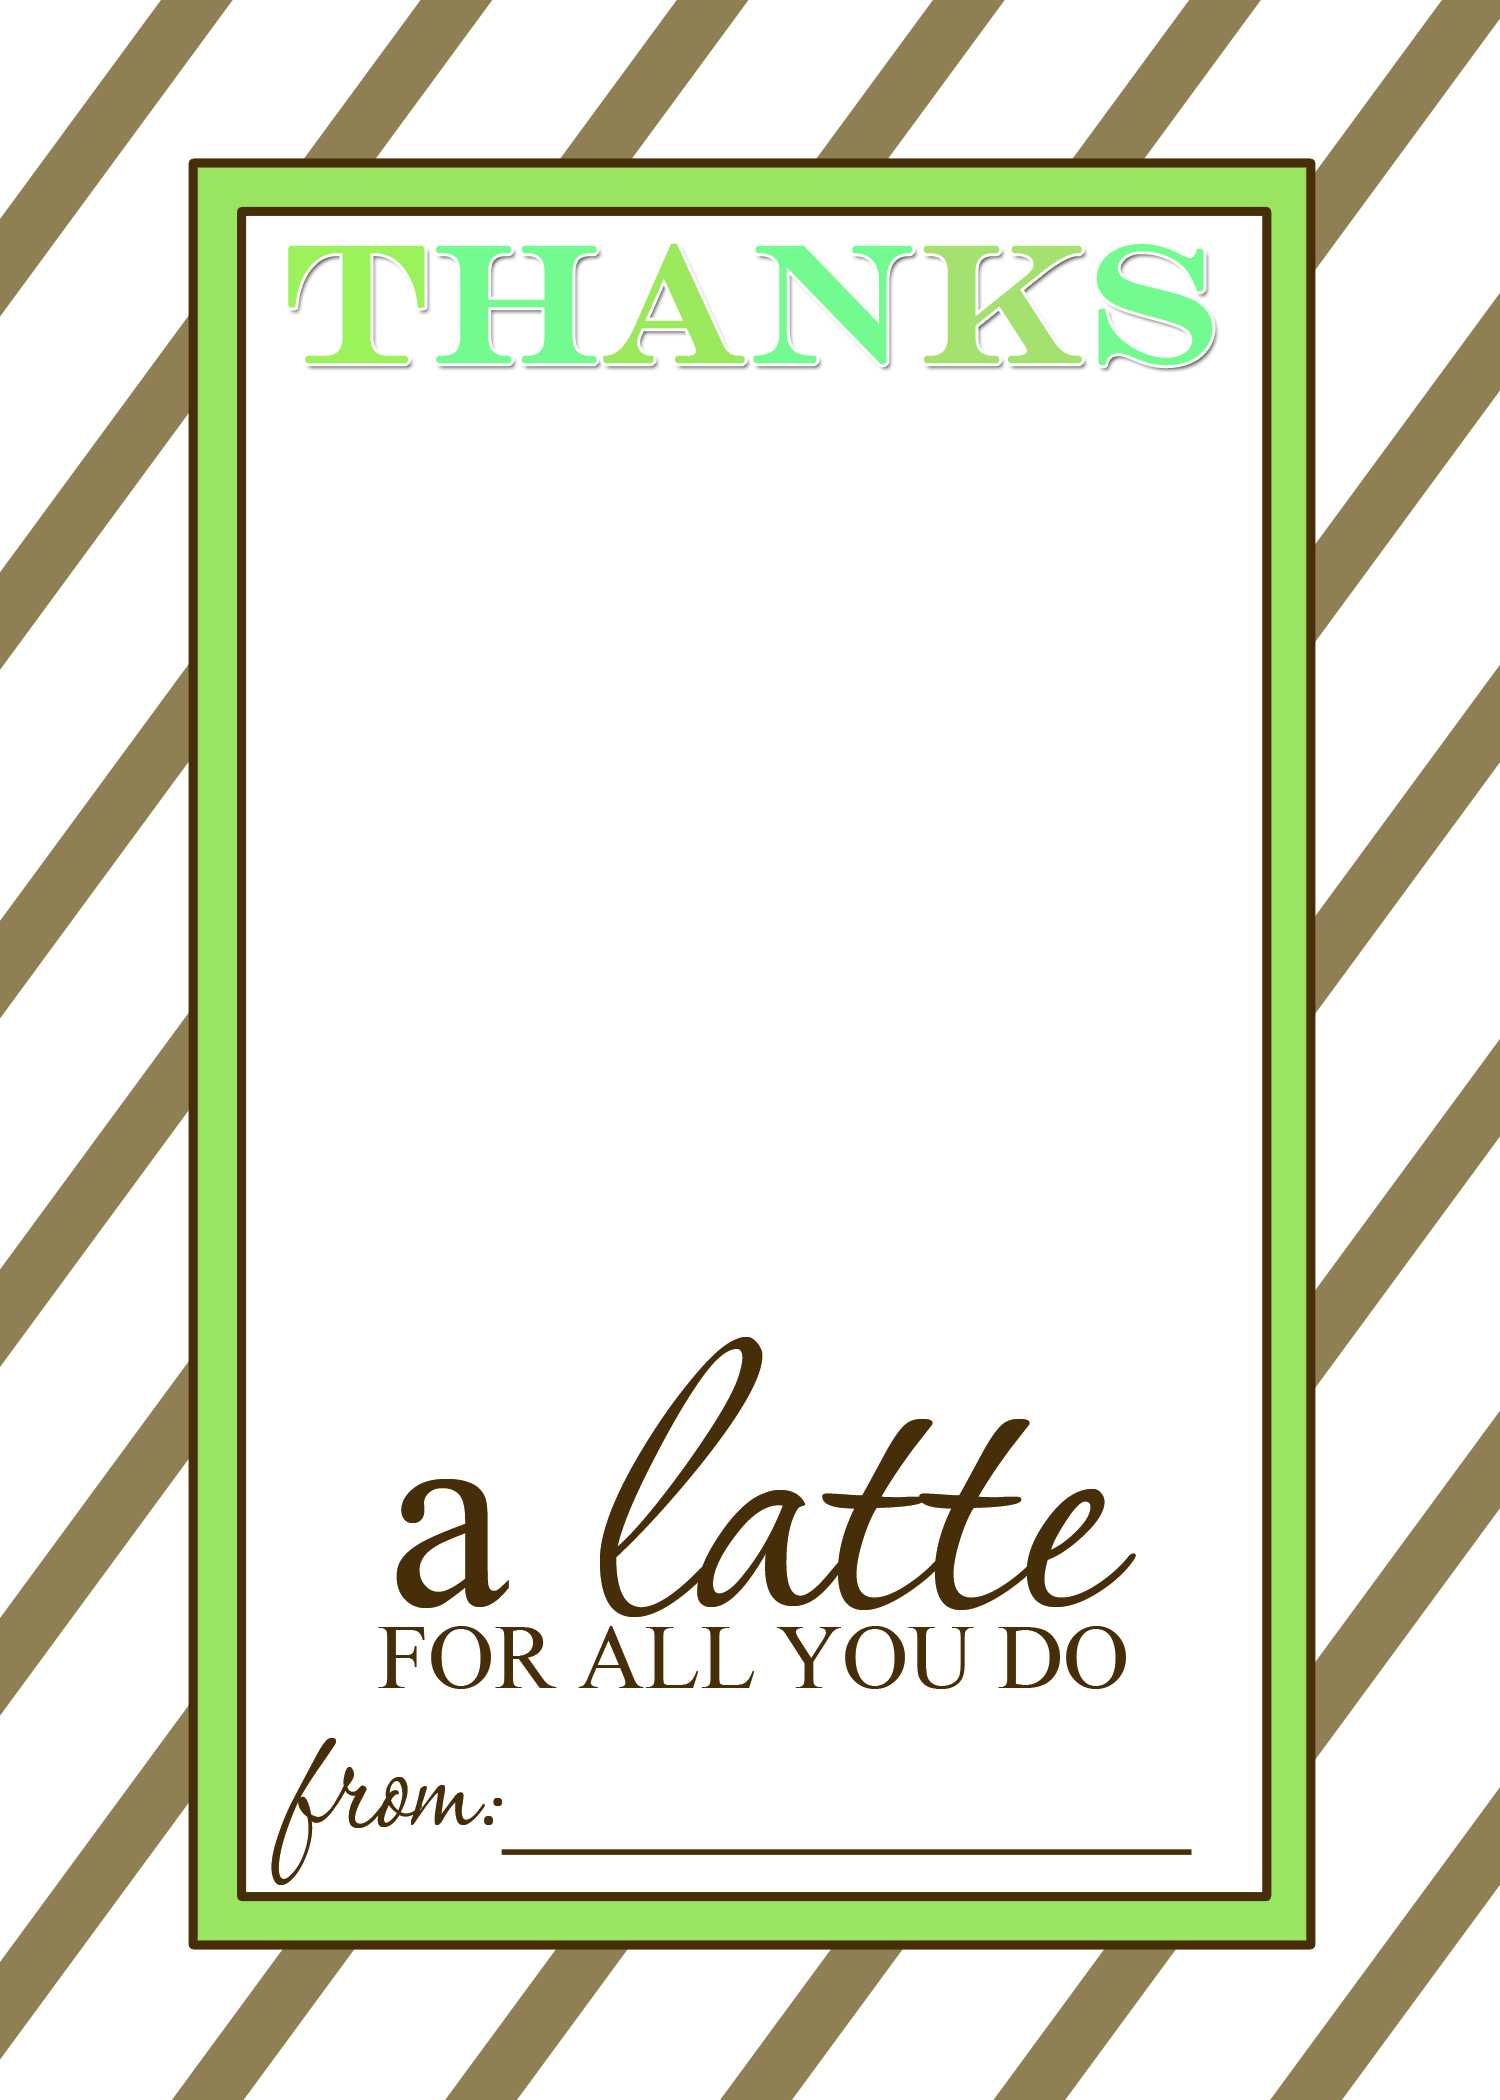 That's Country Living With Thanks A Latte Card Template